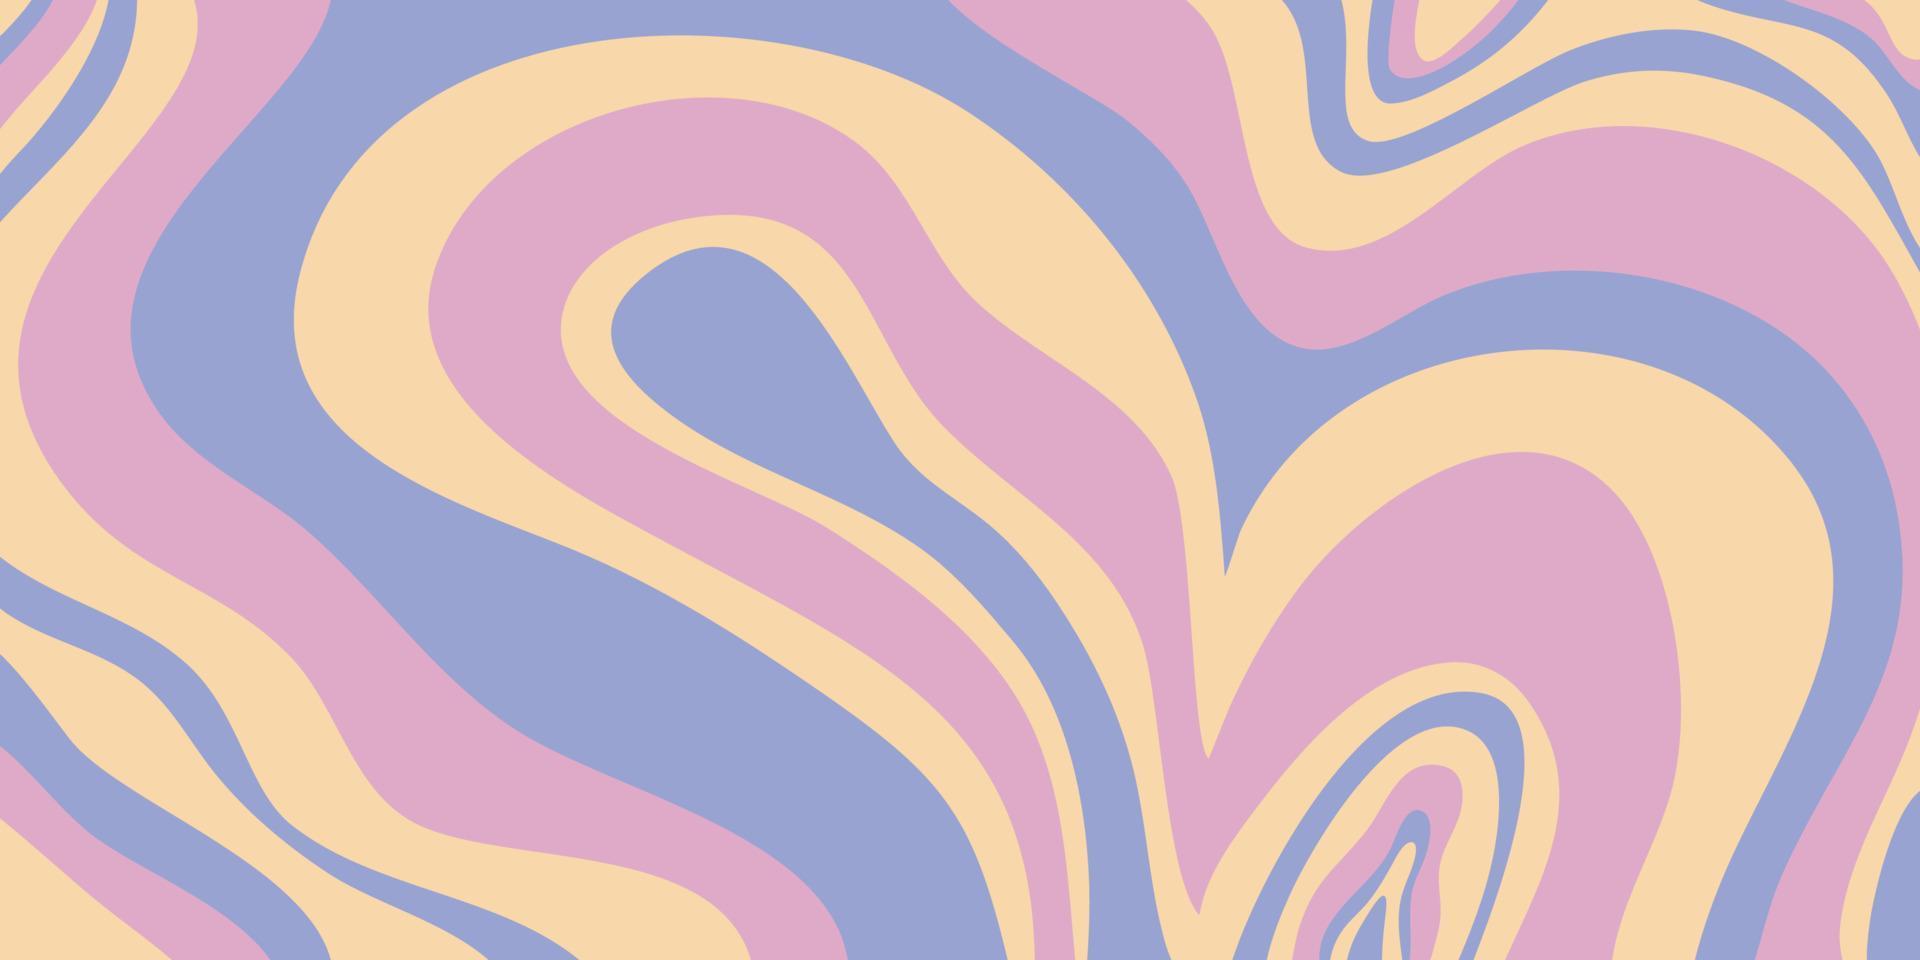 Psychedelic swirl groovy poster. Psychedelic retro wave wallpaper. Liquid groovy background. Vector design illustration